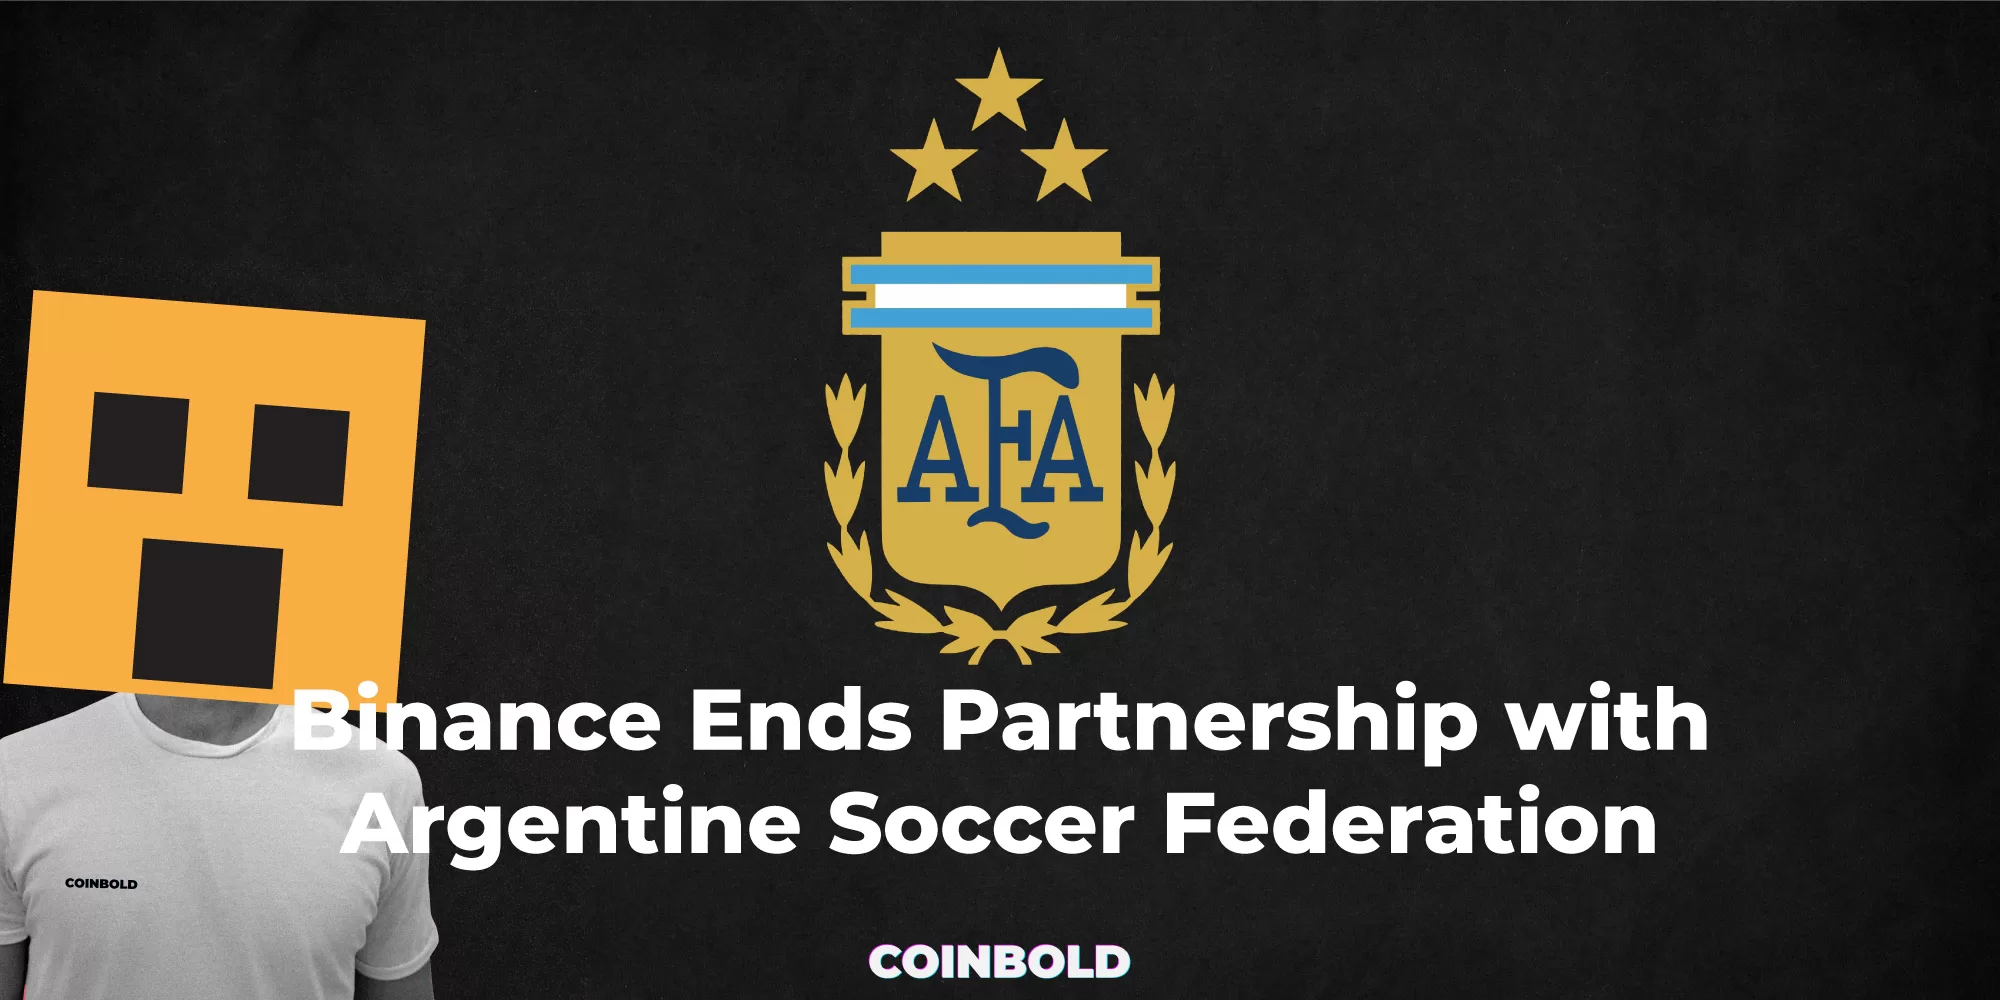 Binance Ends Partnership with Argentine Soccer Federation